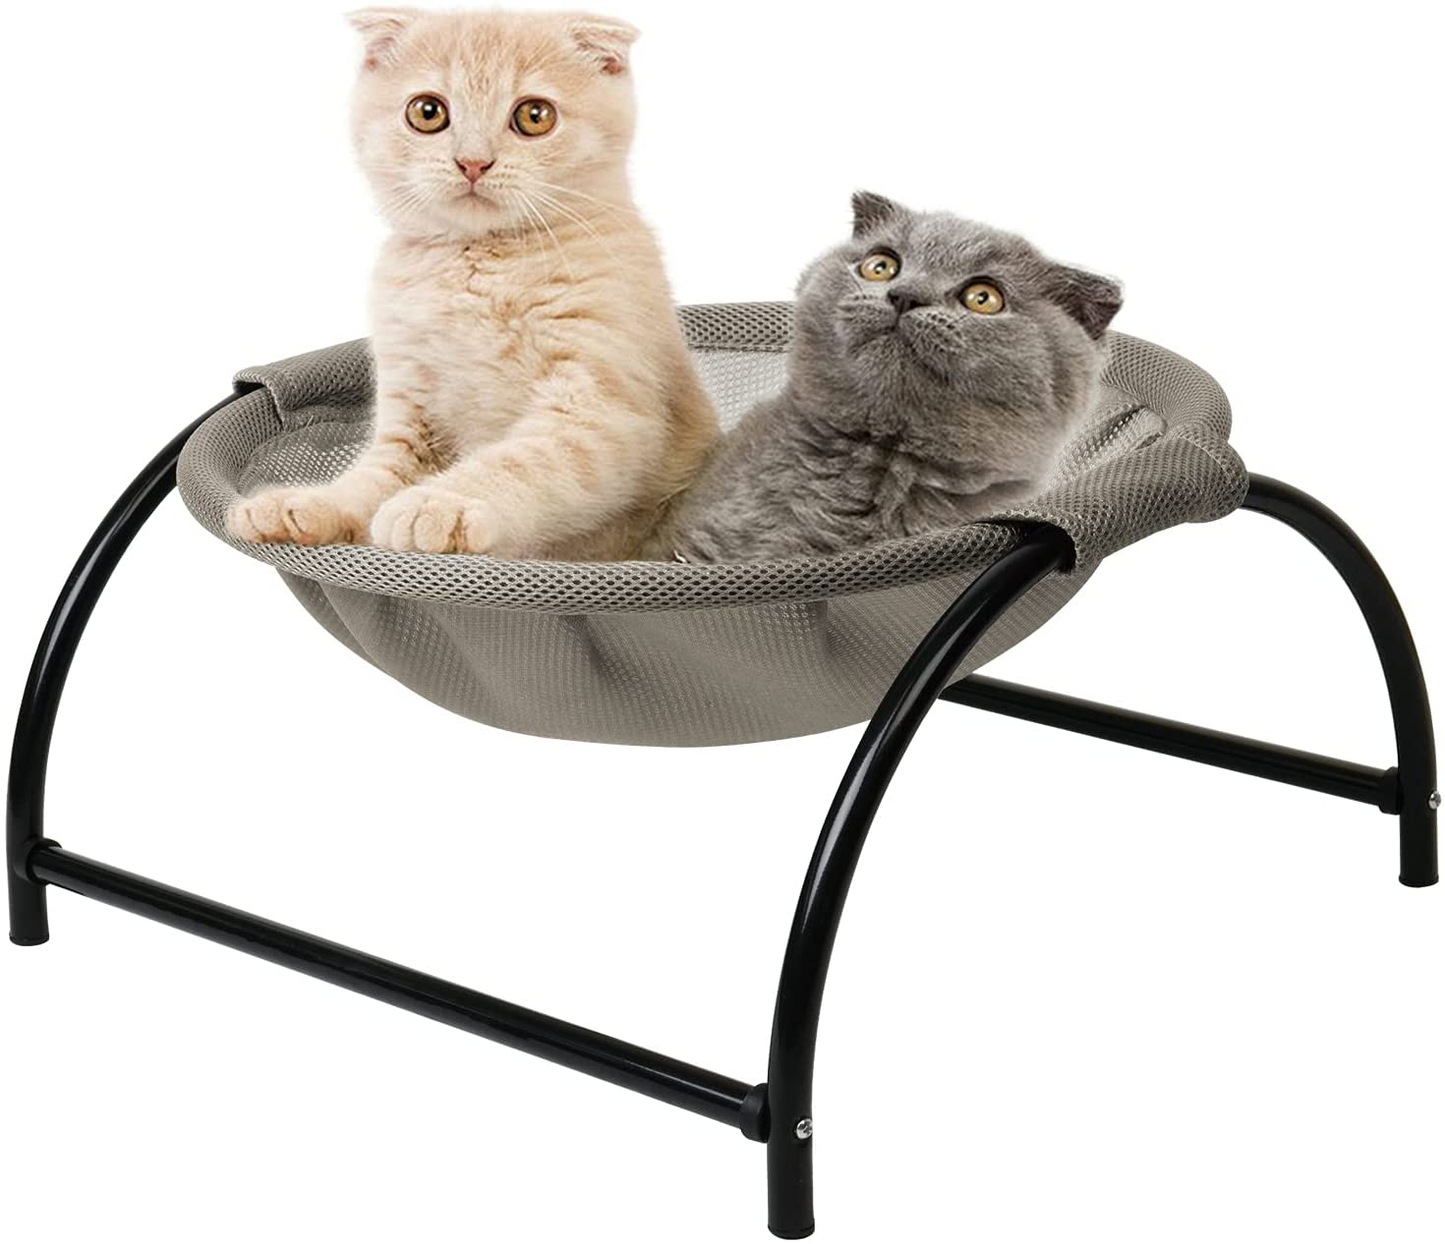 LOOBANI Cat Bed Hammock, Removable & Washable Elevated Pet Bed, Add Silicone Non-Slip Pads for Safe & Stable Protection of Floor, Suitable for Indoor & Outdoor Cat Chair for Kitty and Puppy